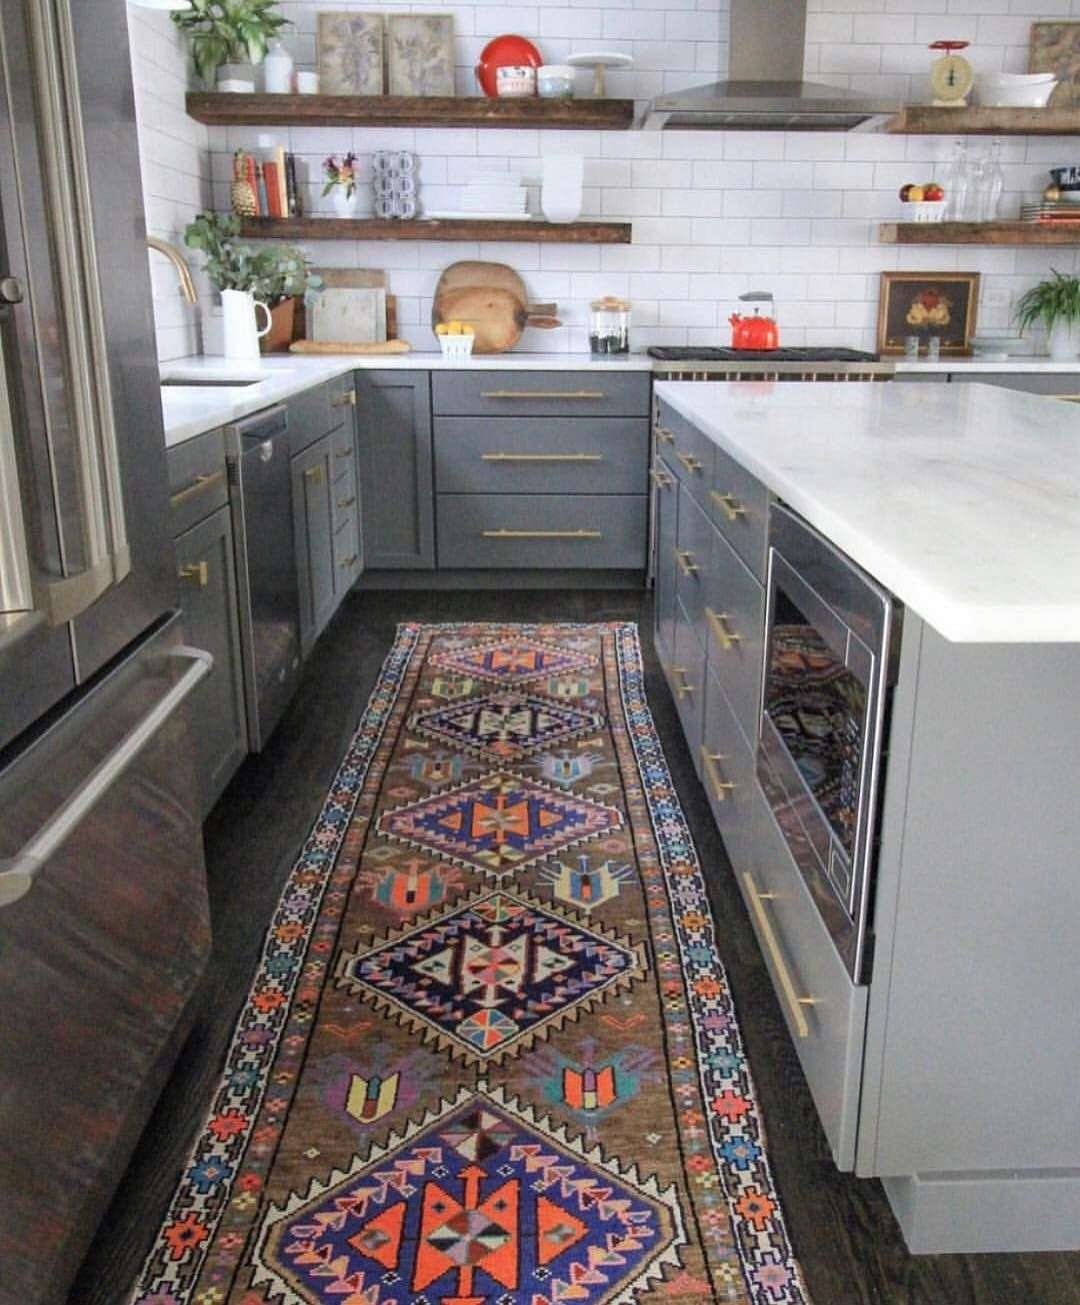 22 Wonderful Pictures Of White Kitchens with Hardwood Floors 2024 free download pictures of white kitchens with hardwood floors of how to area rug luxury black white area rug area rugs for hardwood for how to area rug awesome area rugs for hardwood floors best jute rugs